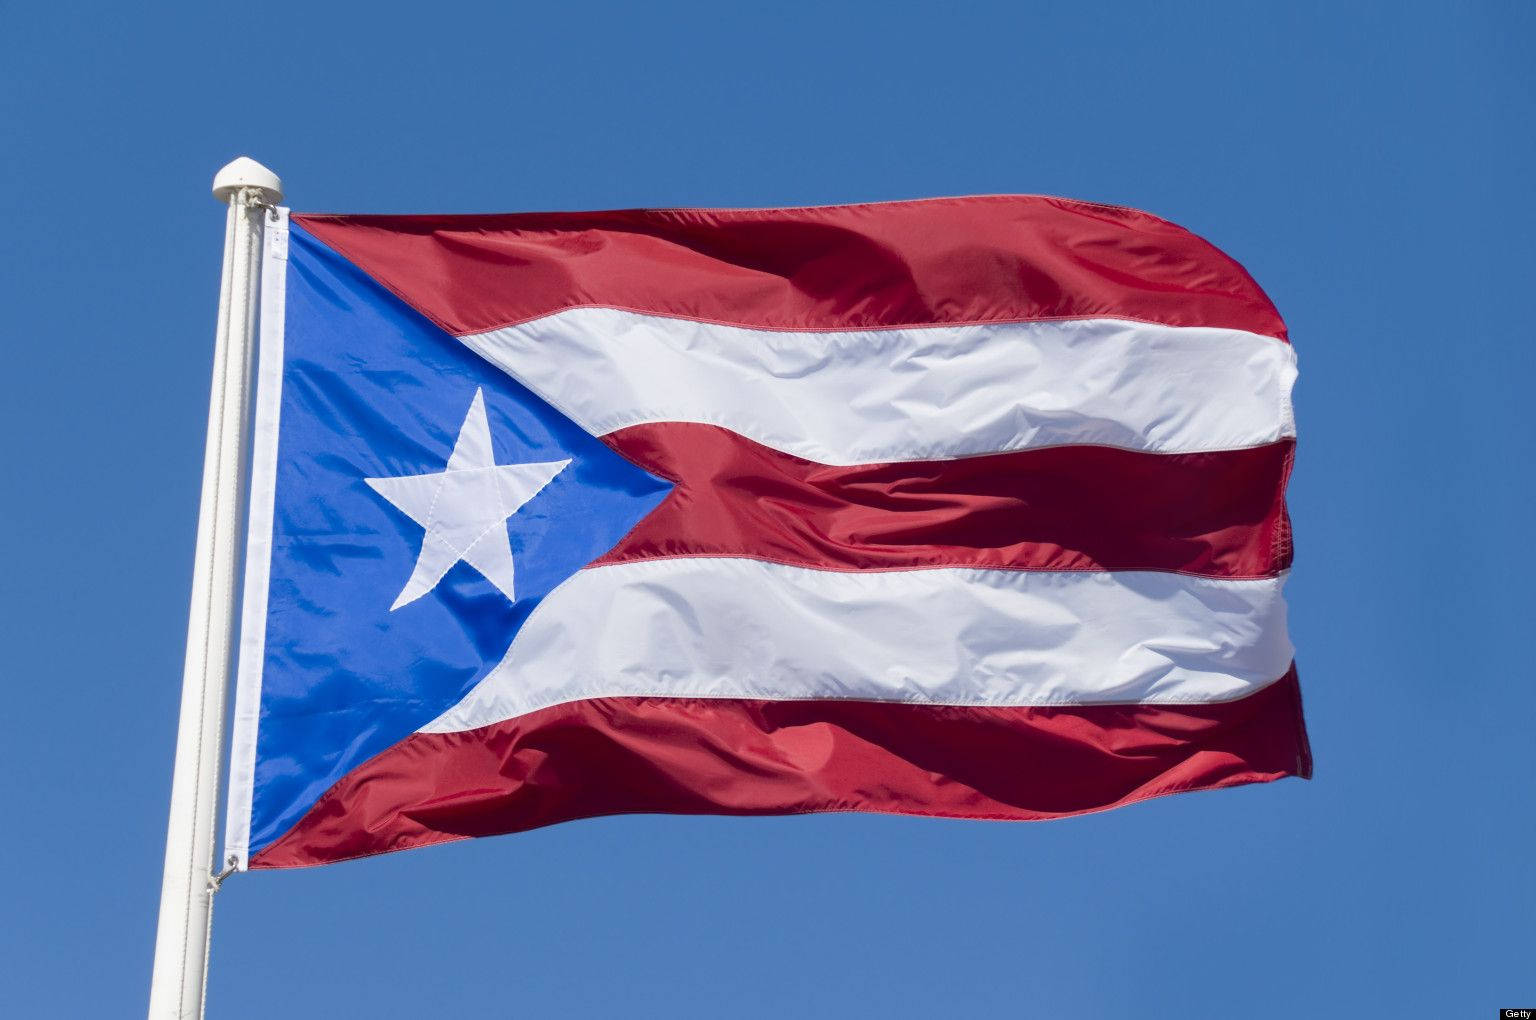 Puerto Rican Flag Up On Pole Wallpaper